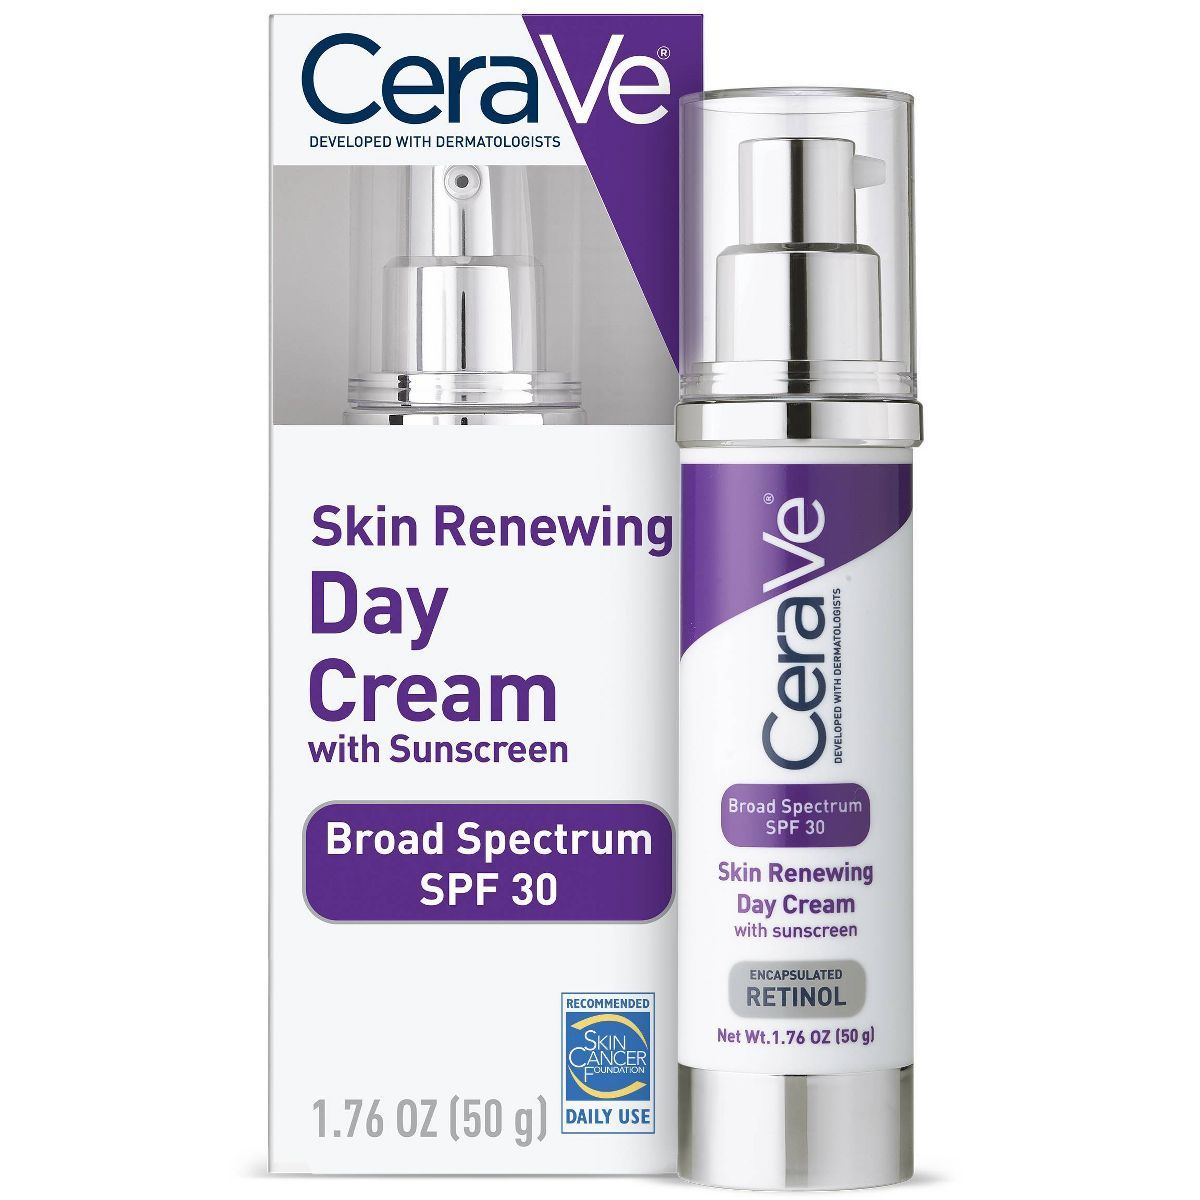 CeraVe Skin Renewing Anti-Aging Face Cream with Sunscreen and Retinol – SPF 30 – 1.76oz | Target